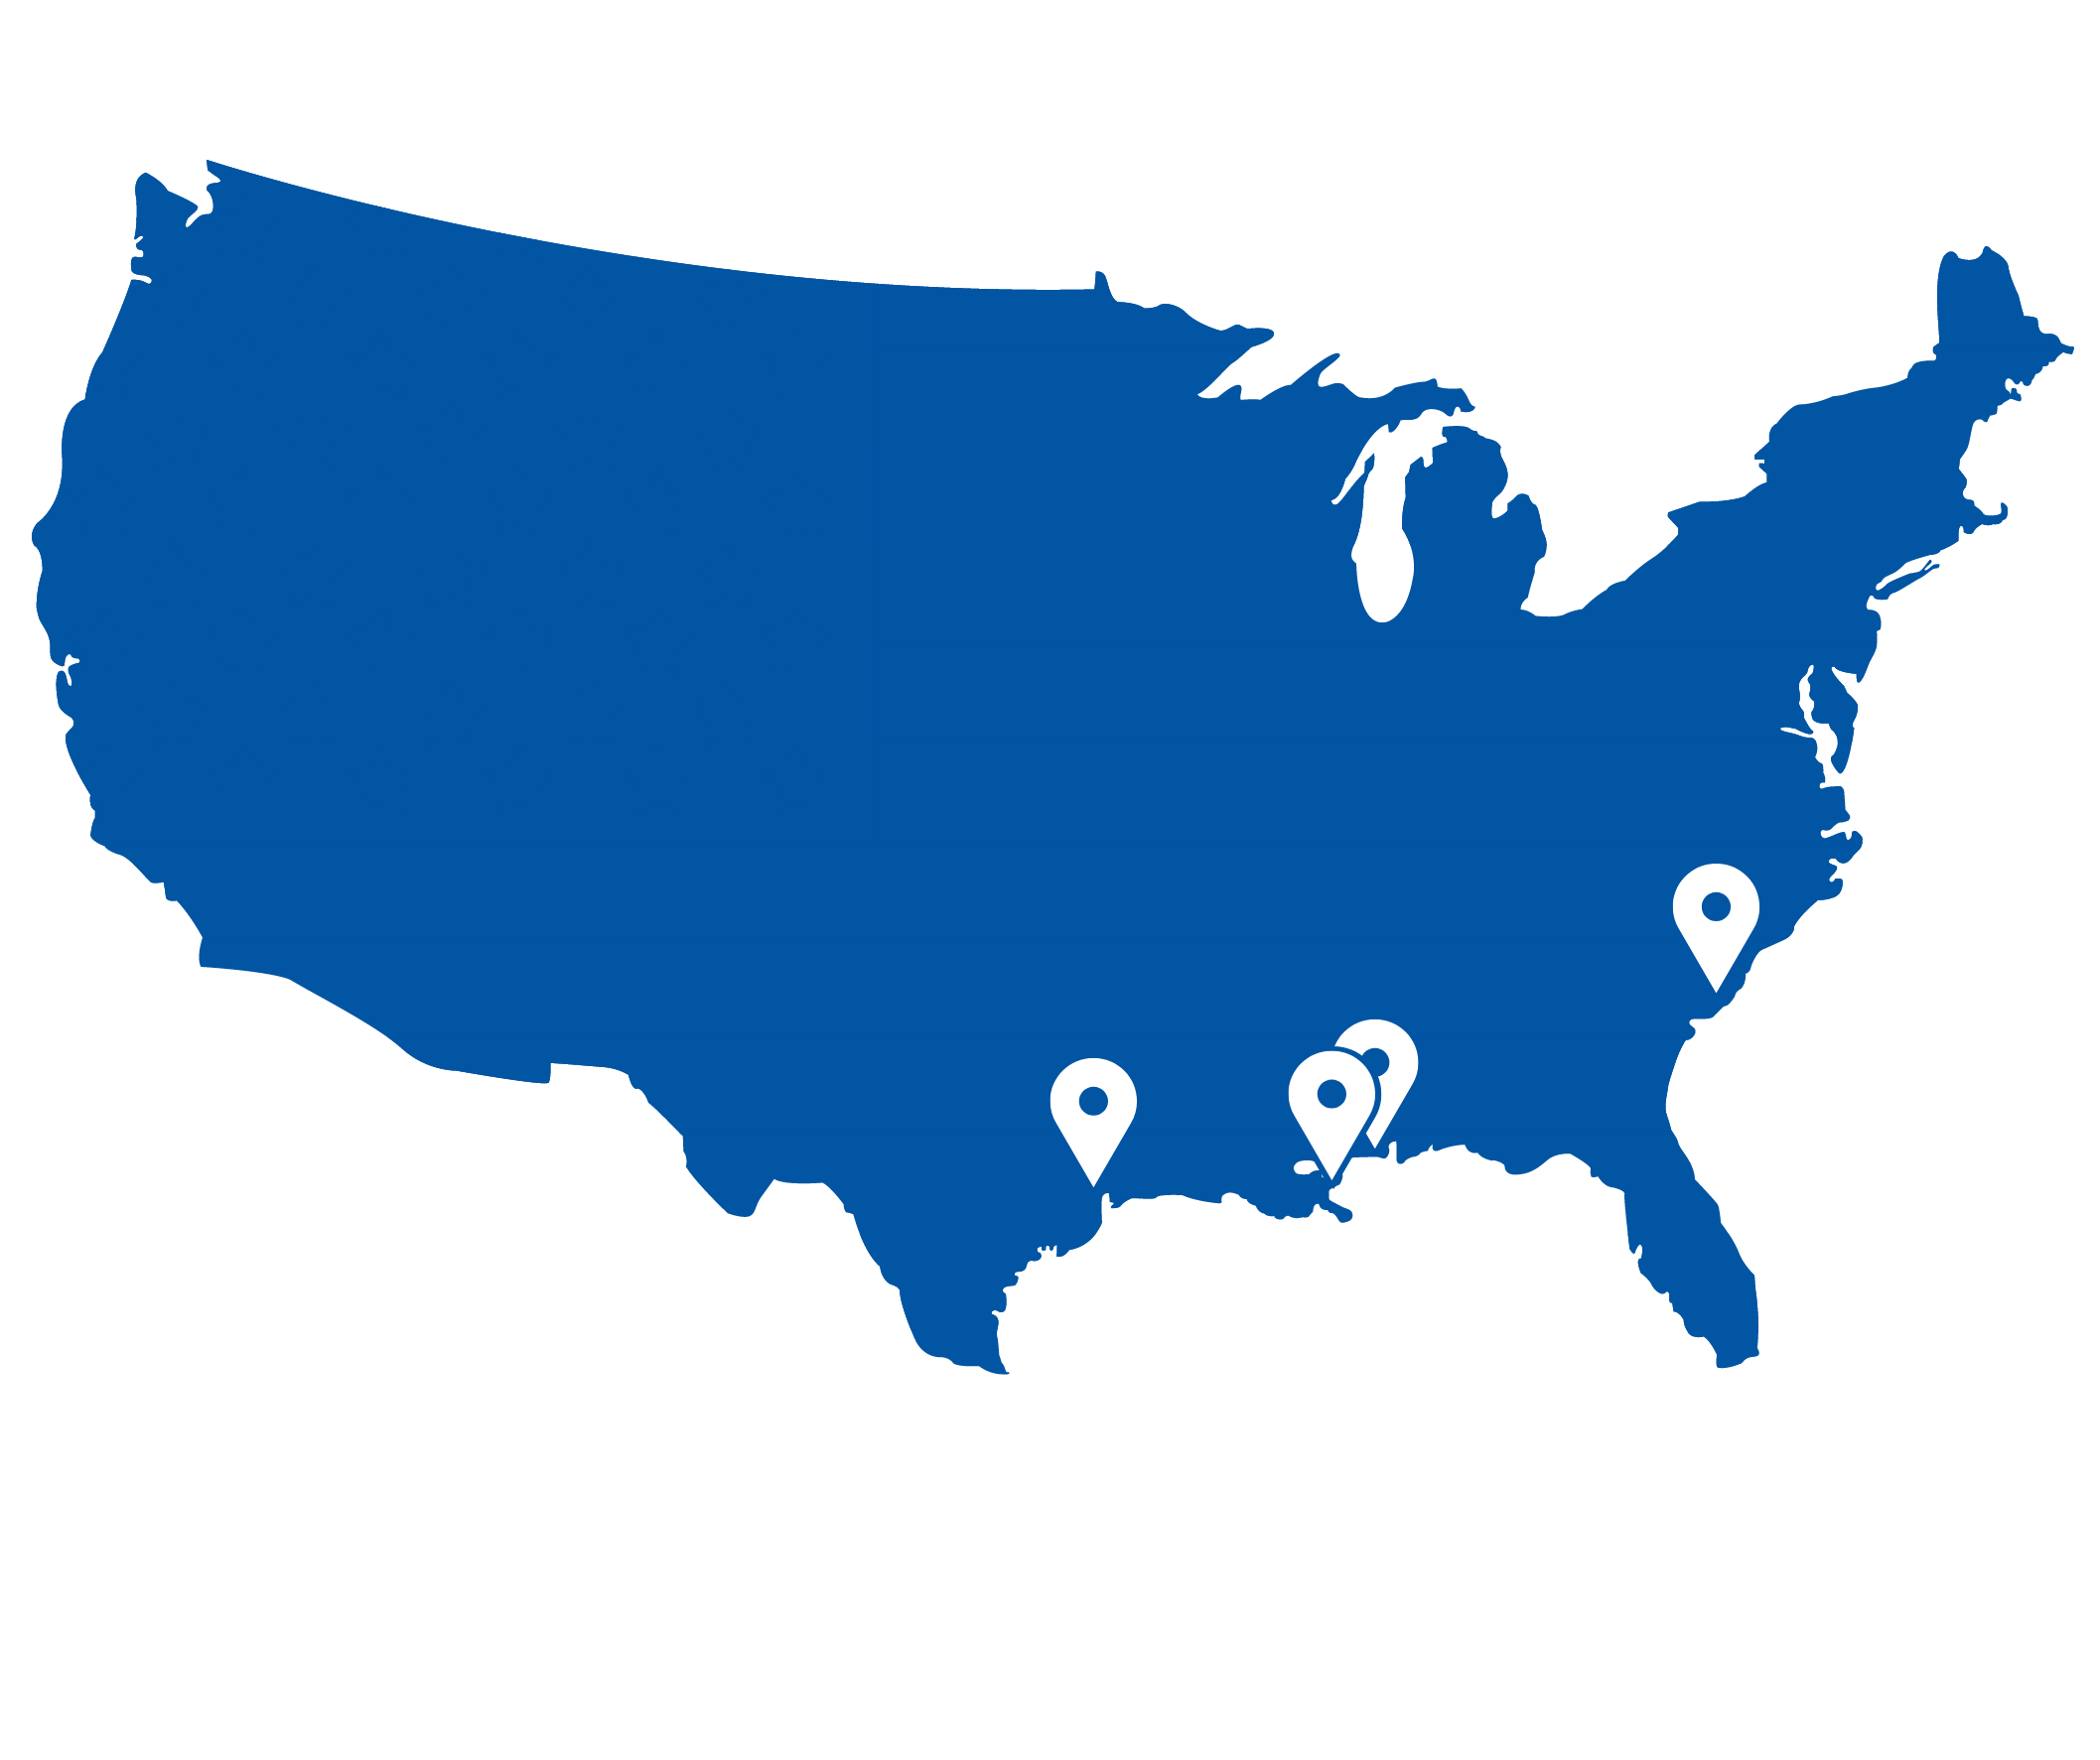 KanAgg Recycling Locations in the Southern US